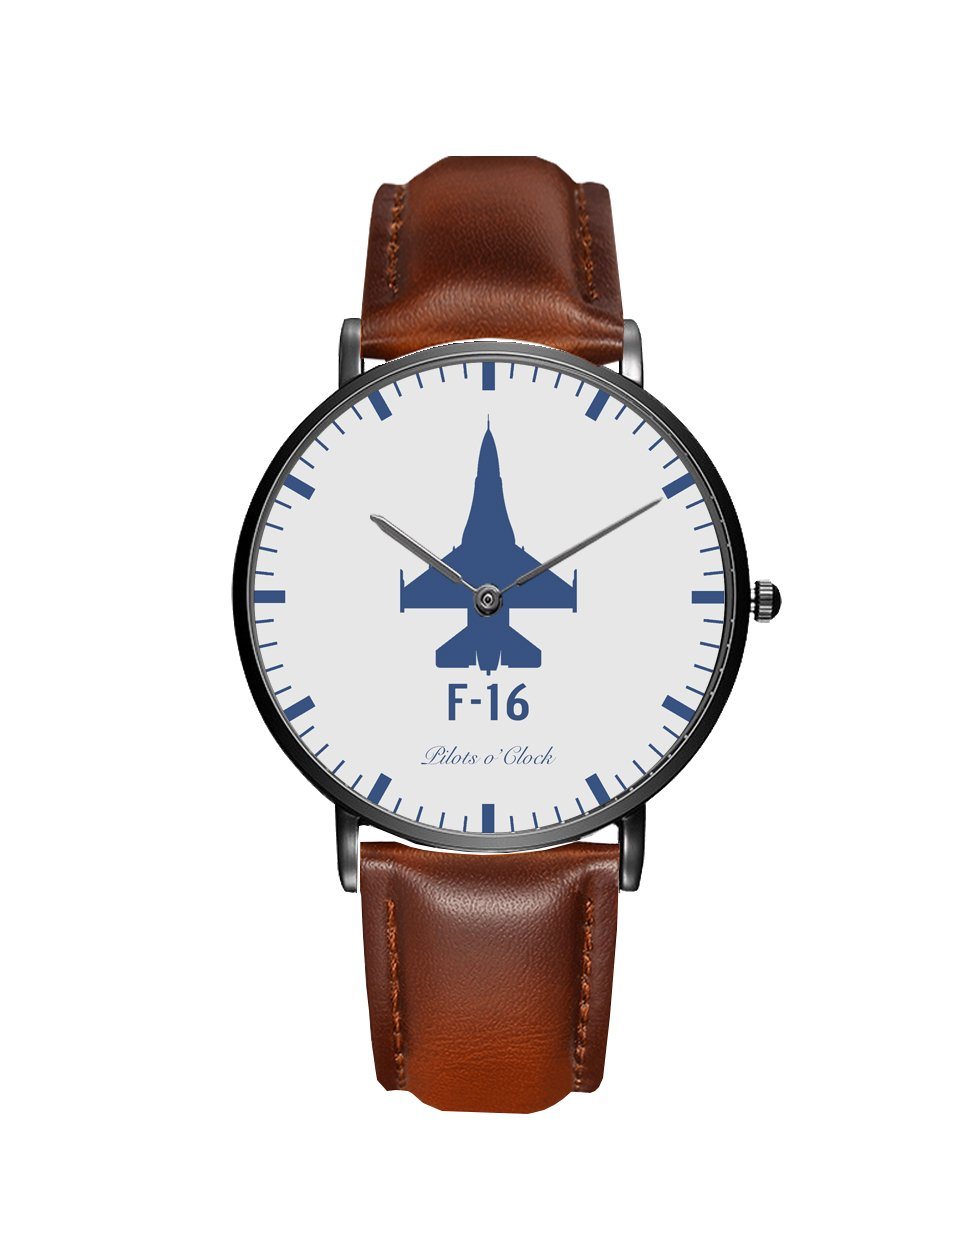 Fighting Falcon F16 Leather Strap Watches Pilot Eyes Store Black & Brown Leather Strap 